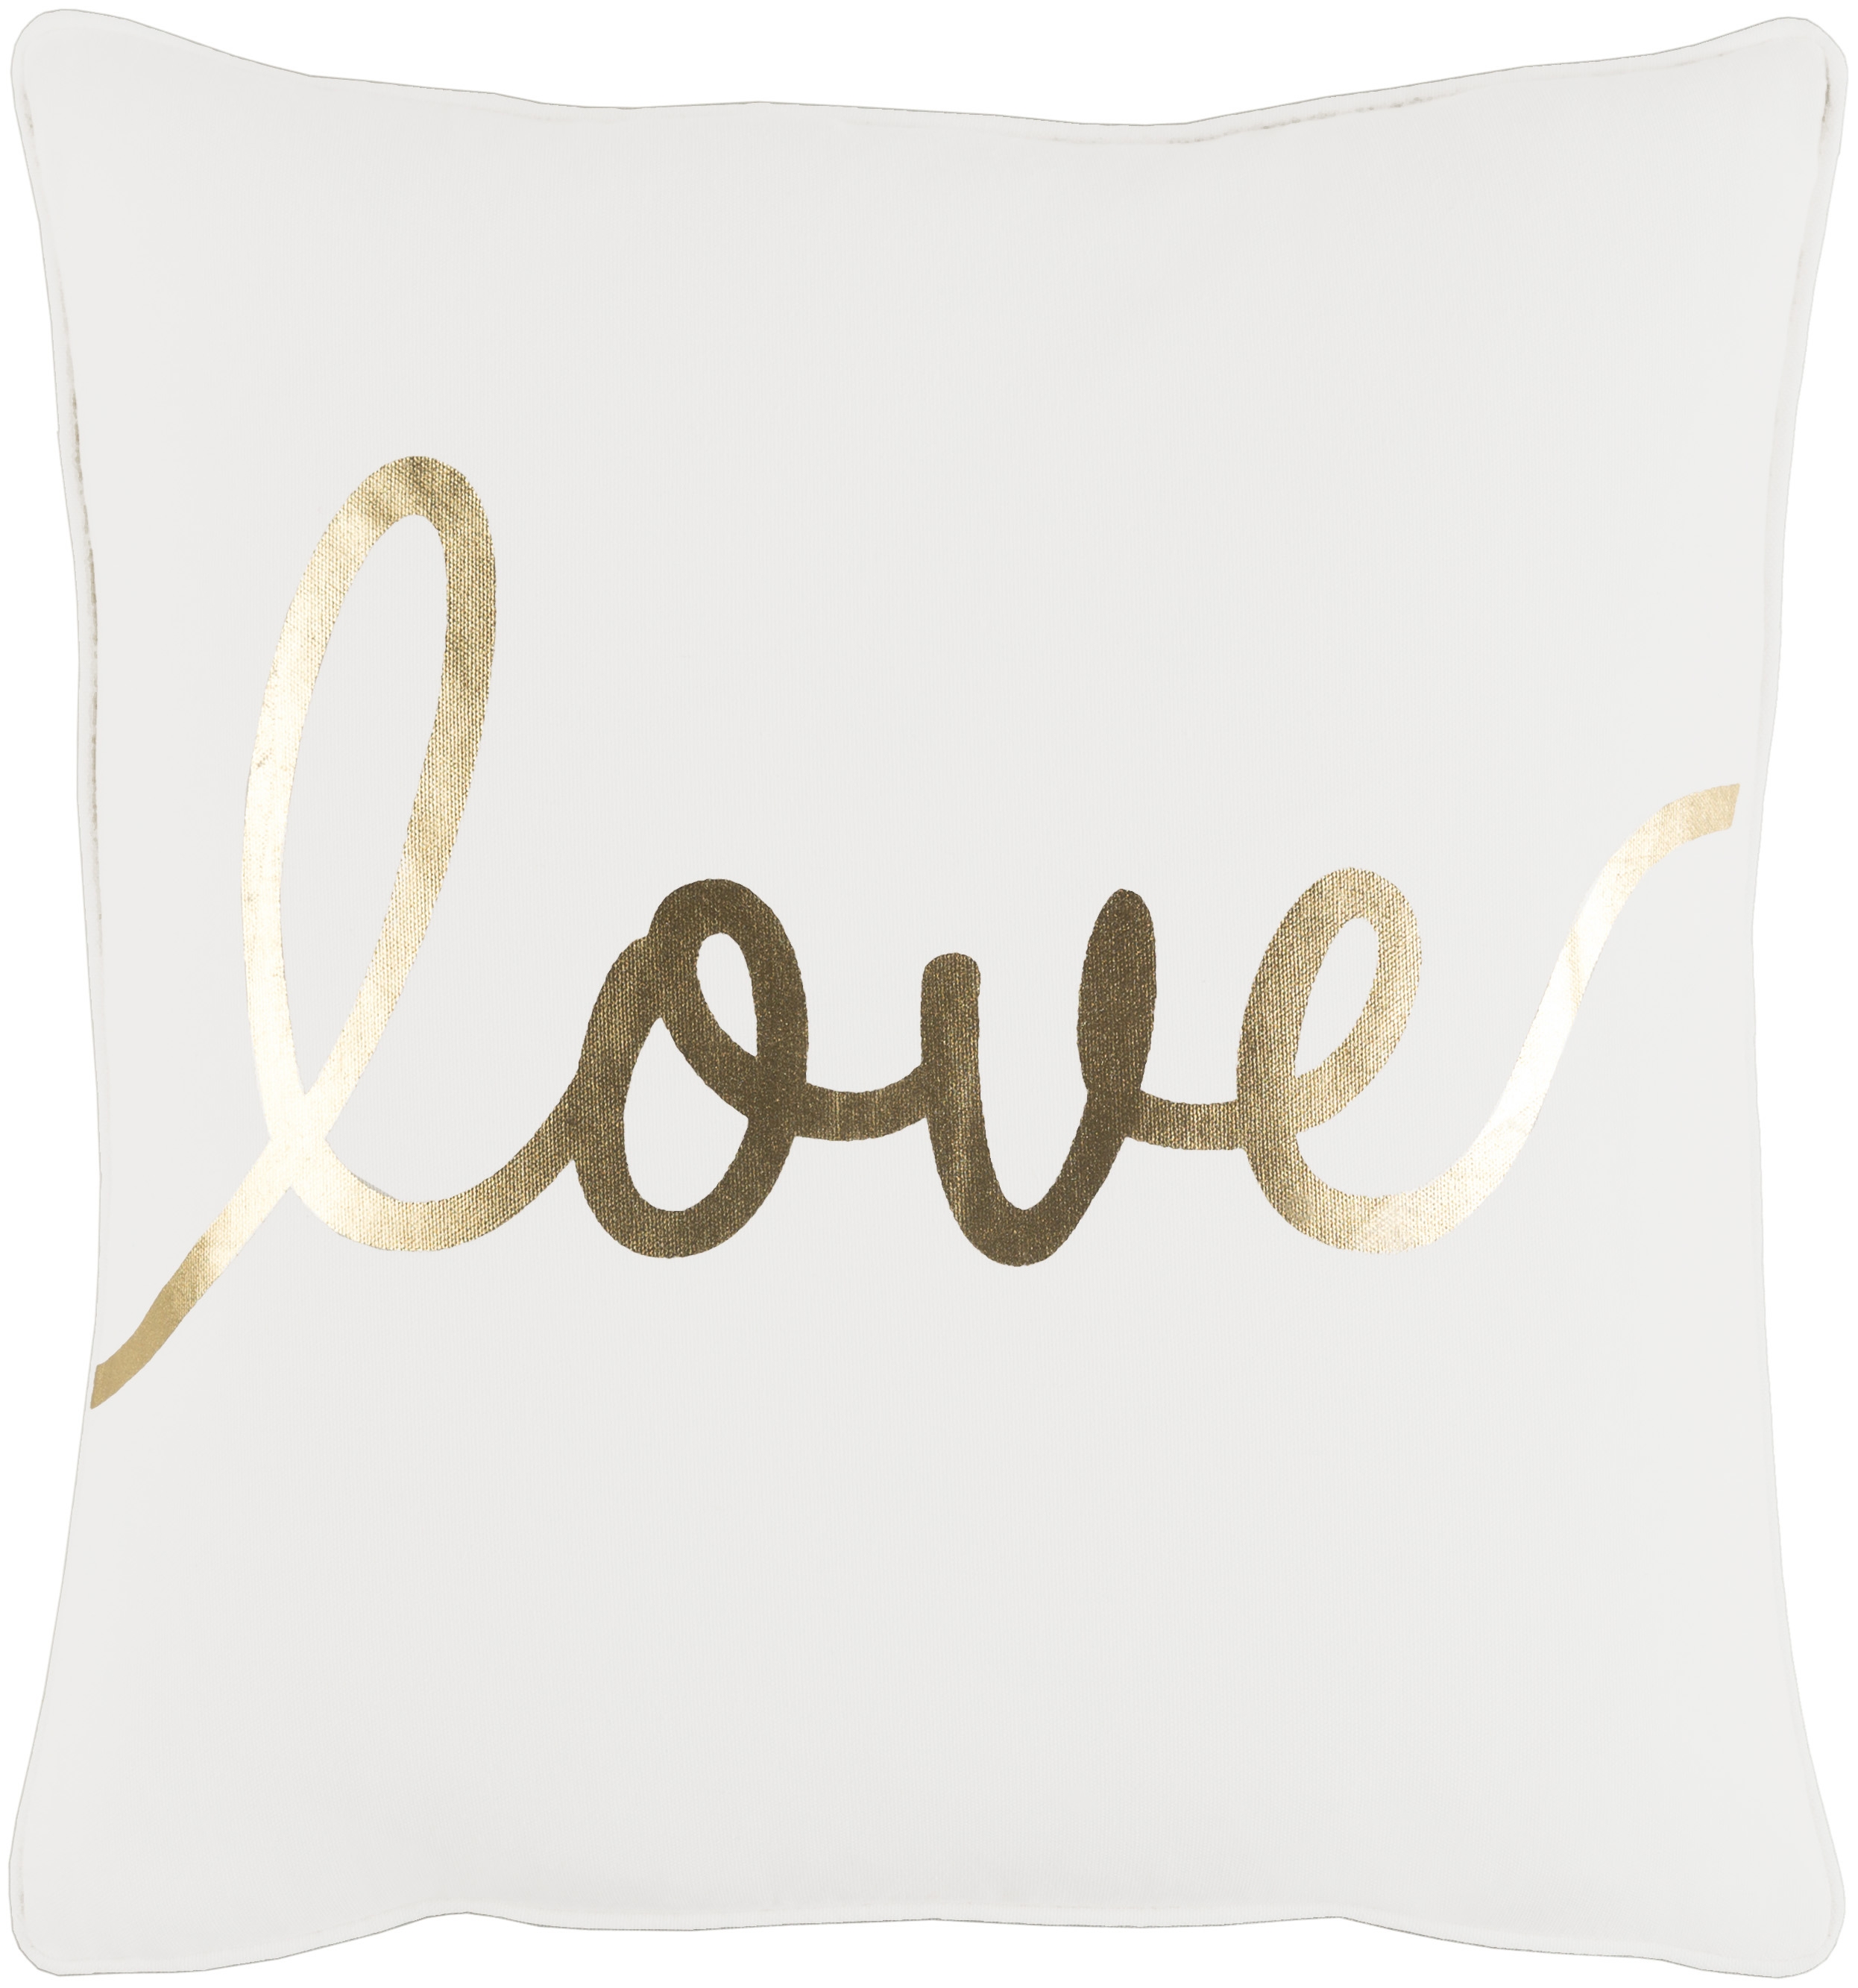 Glyph - GLYP-7100 - 18" x 18" - pillow cover only - Image 0